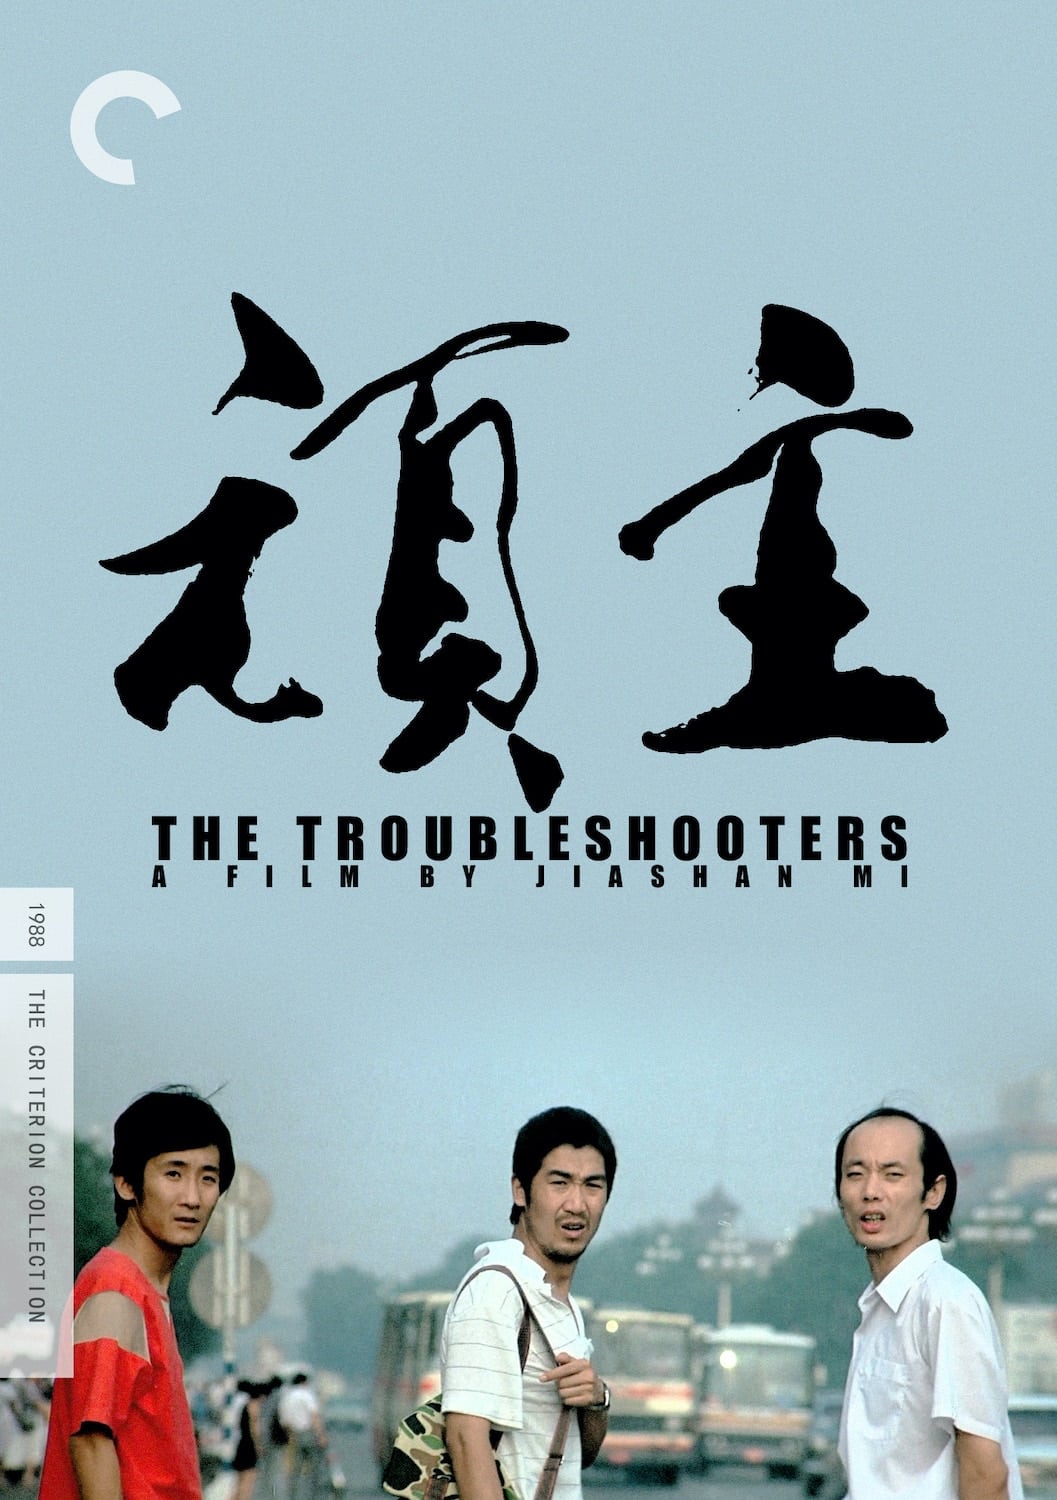 The Troubleshooters (1988)